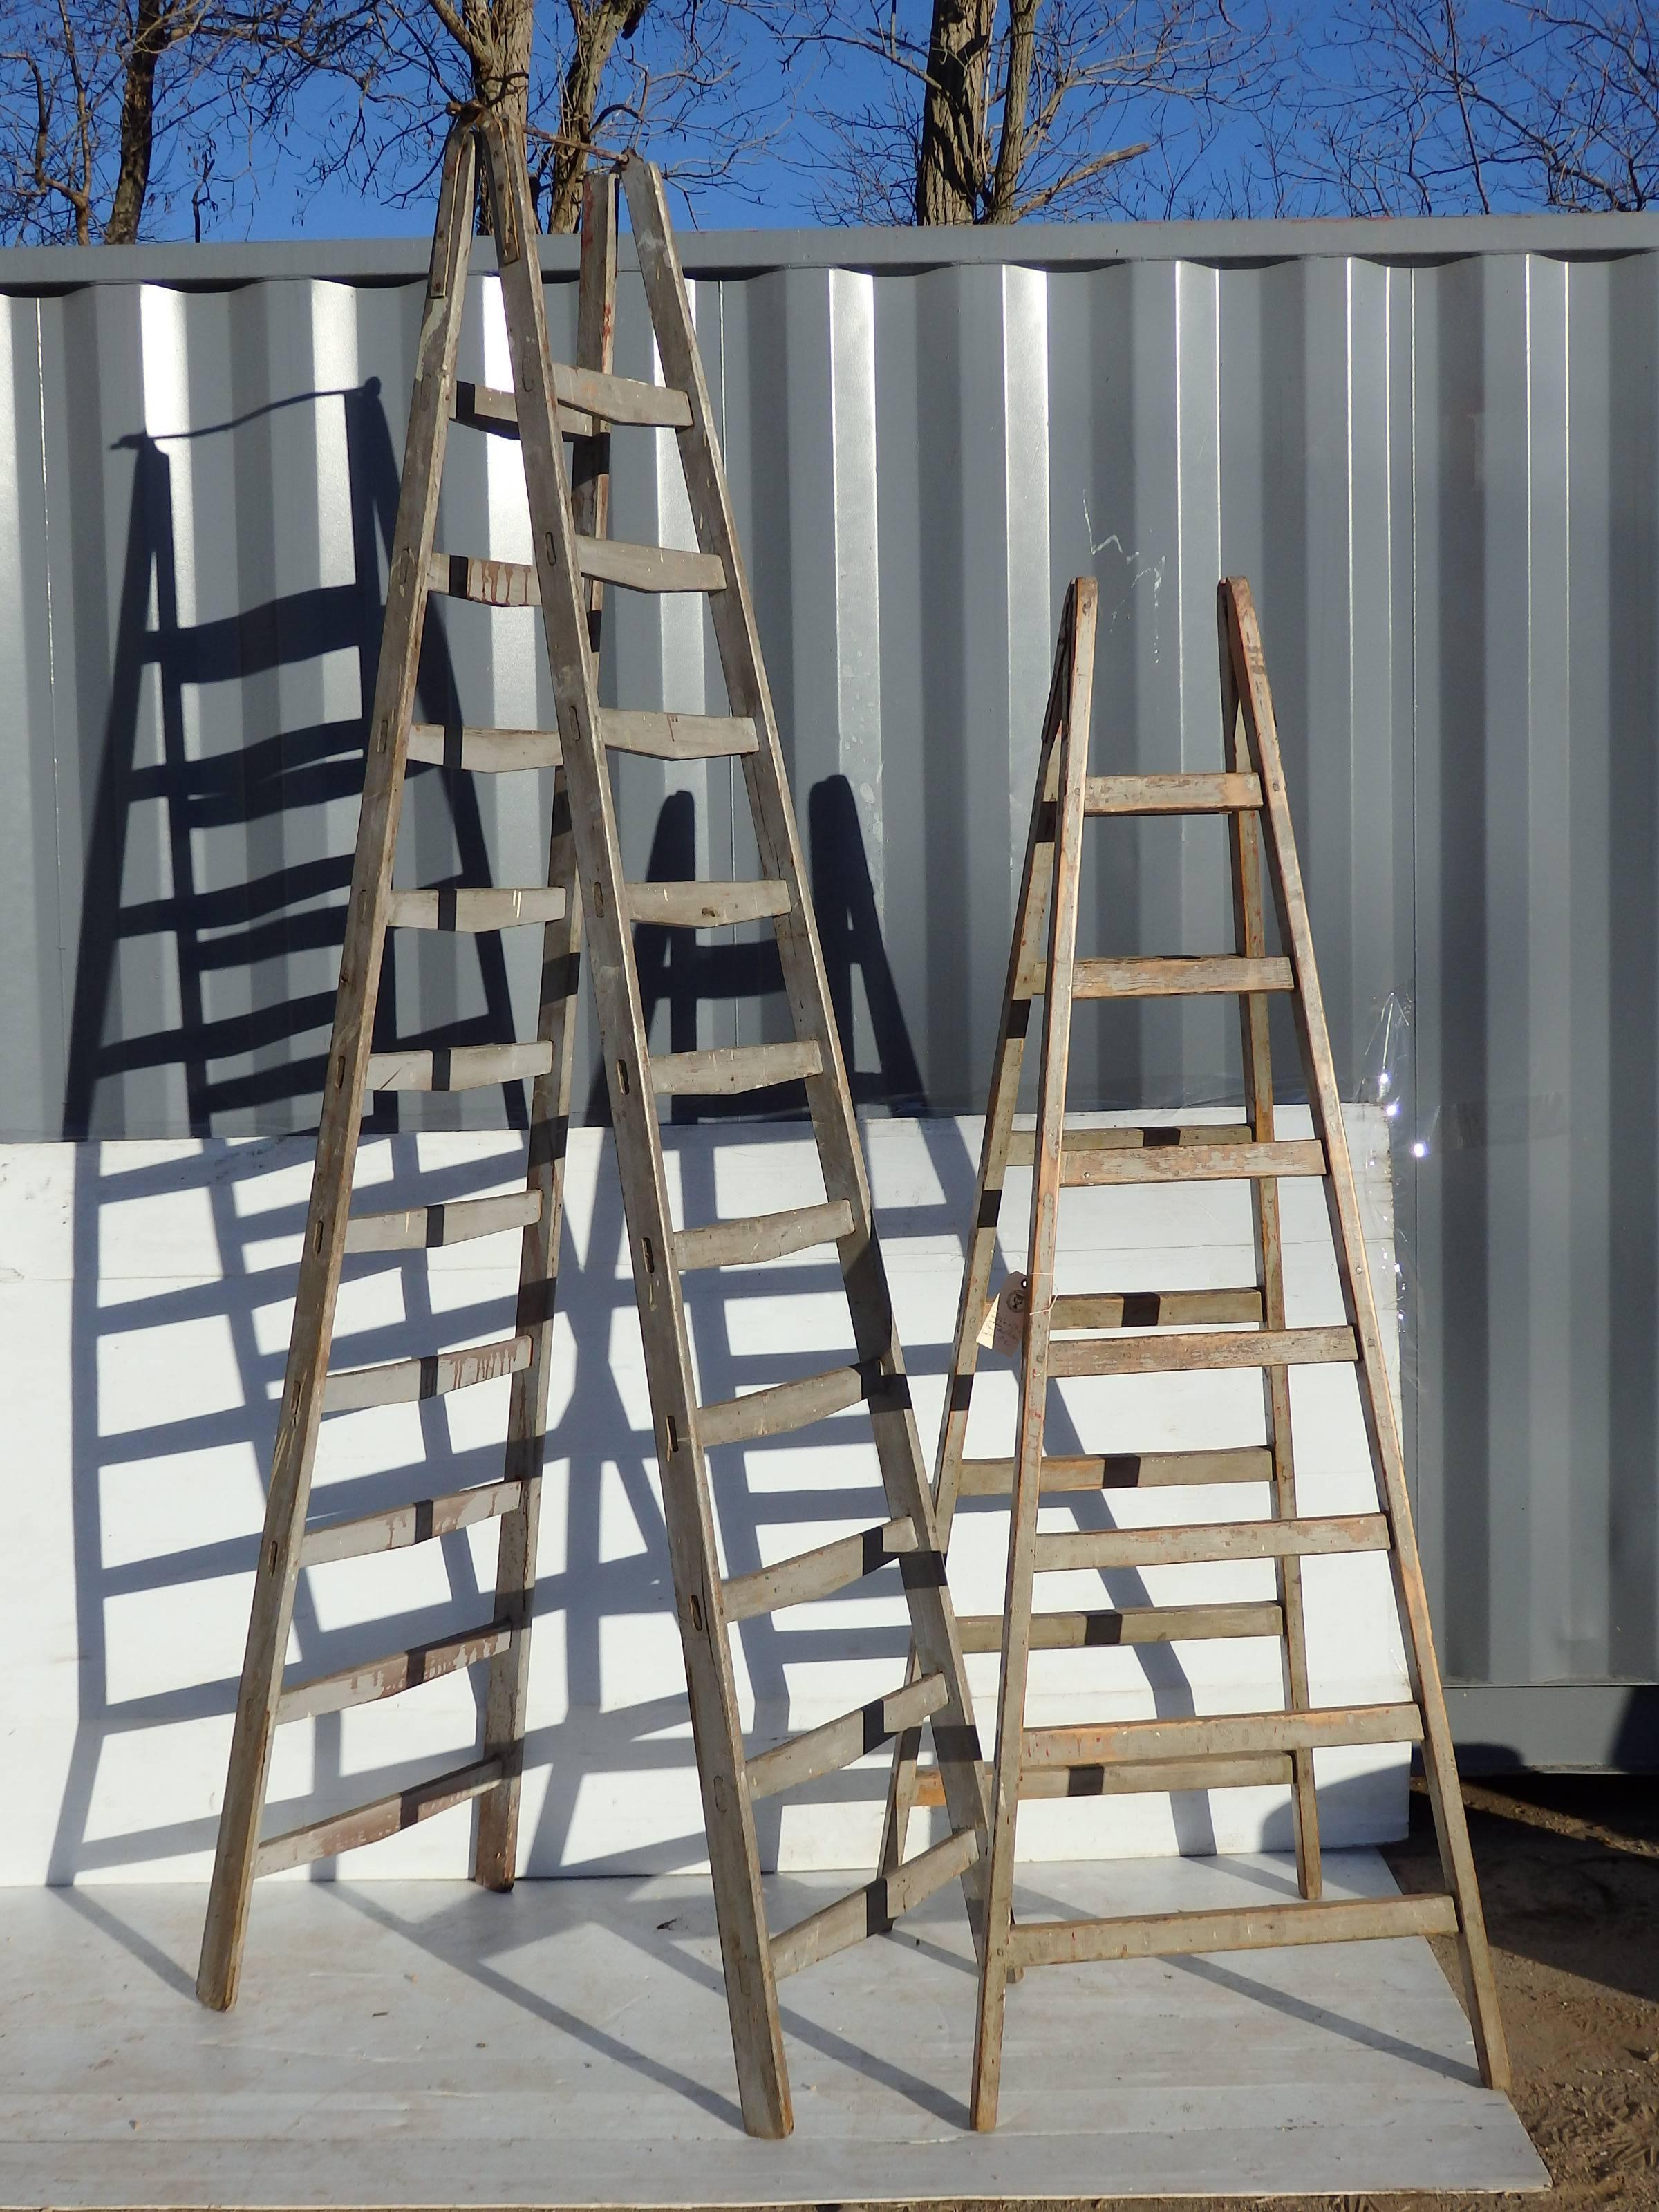 French fruit picking ladders, with remains of original paint. We have other ladders in stock, contact us for availability and current stock.
ladders priced separately
dimensions vary!!